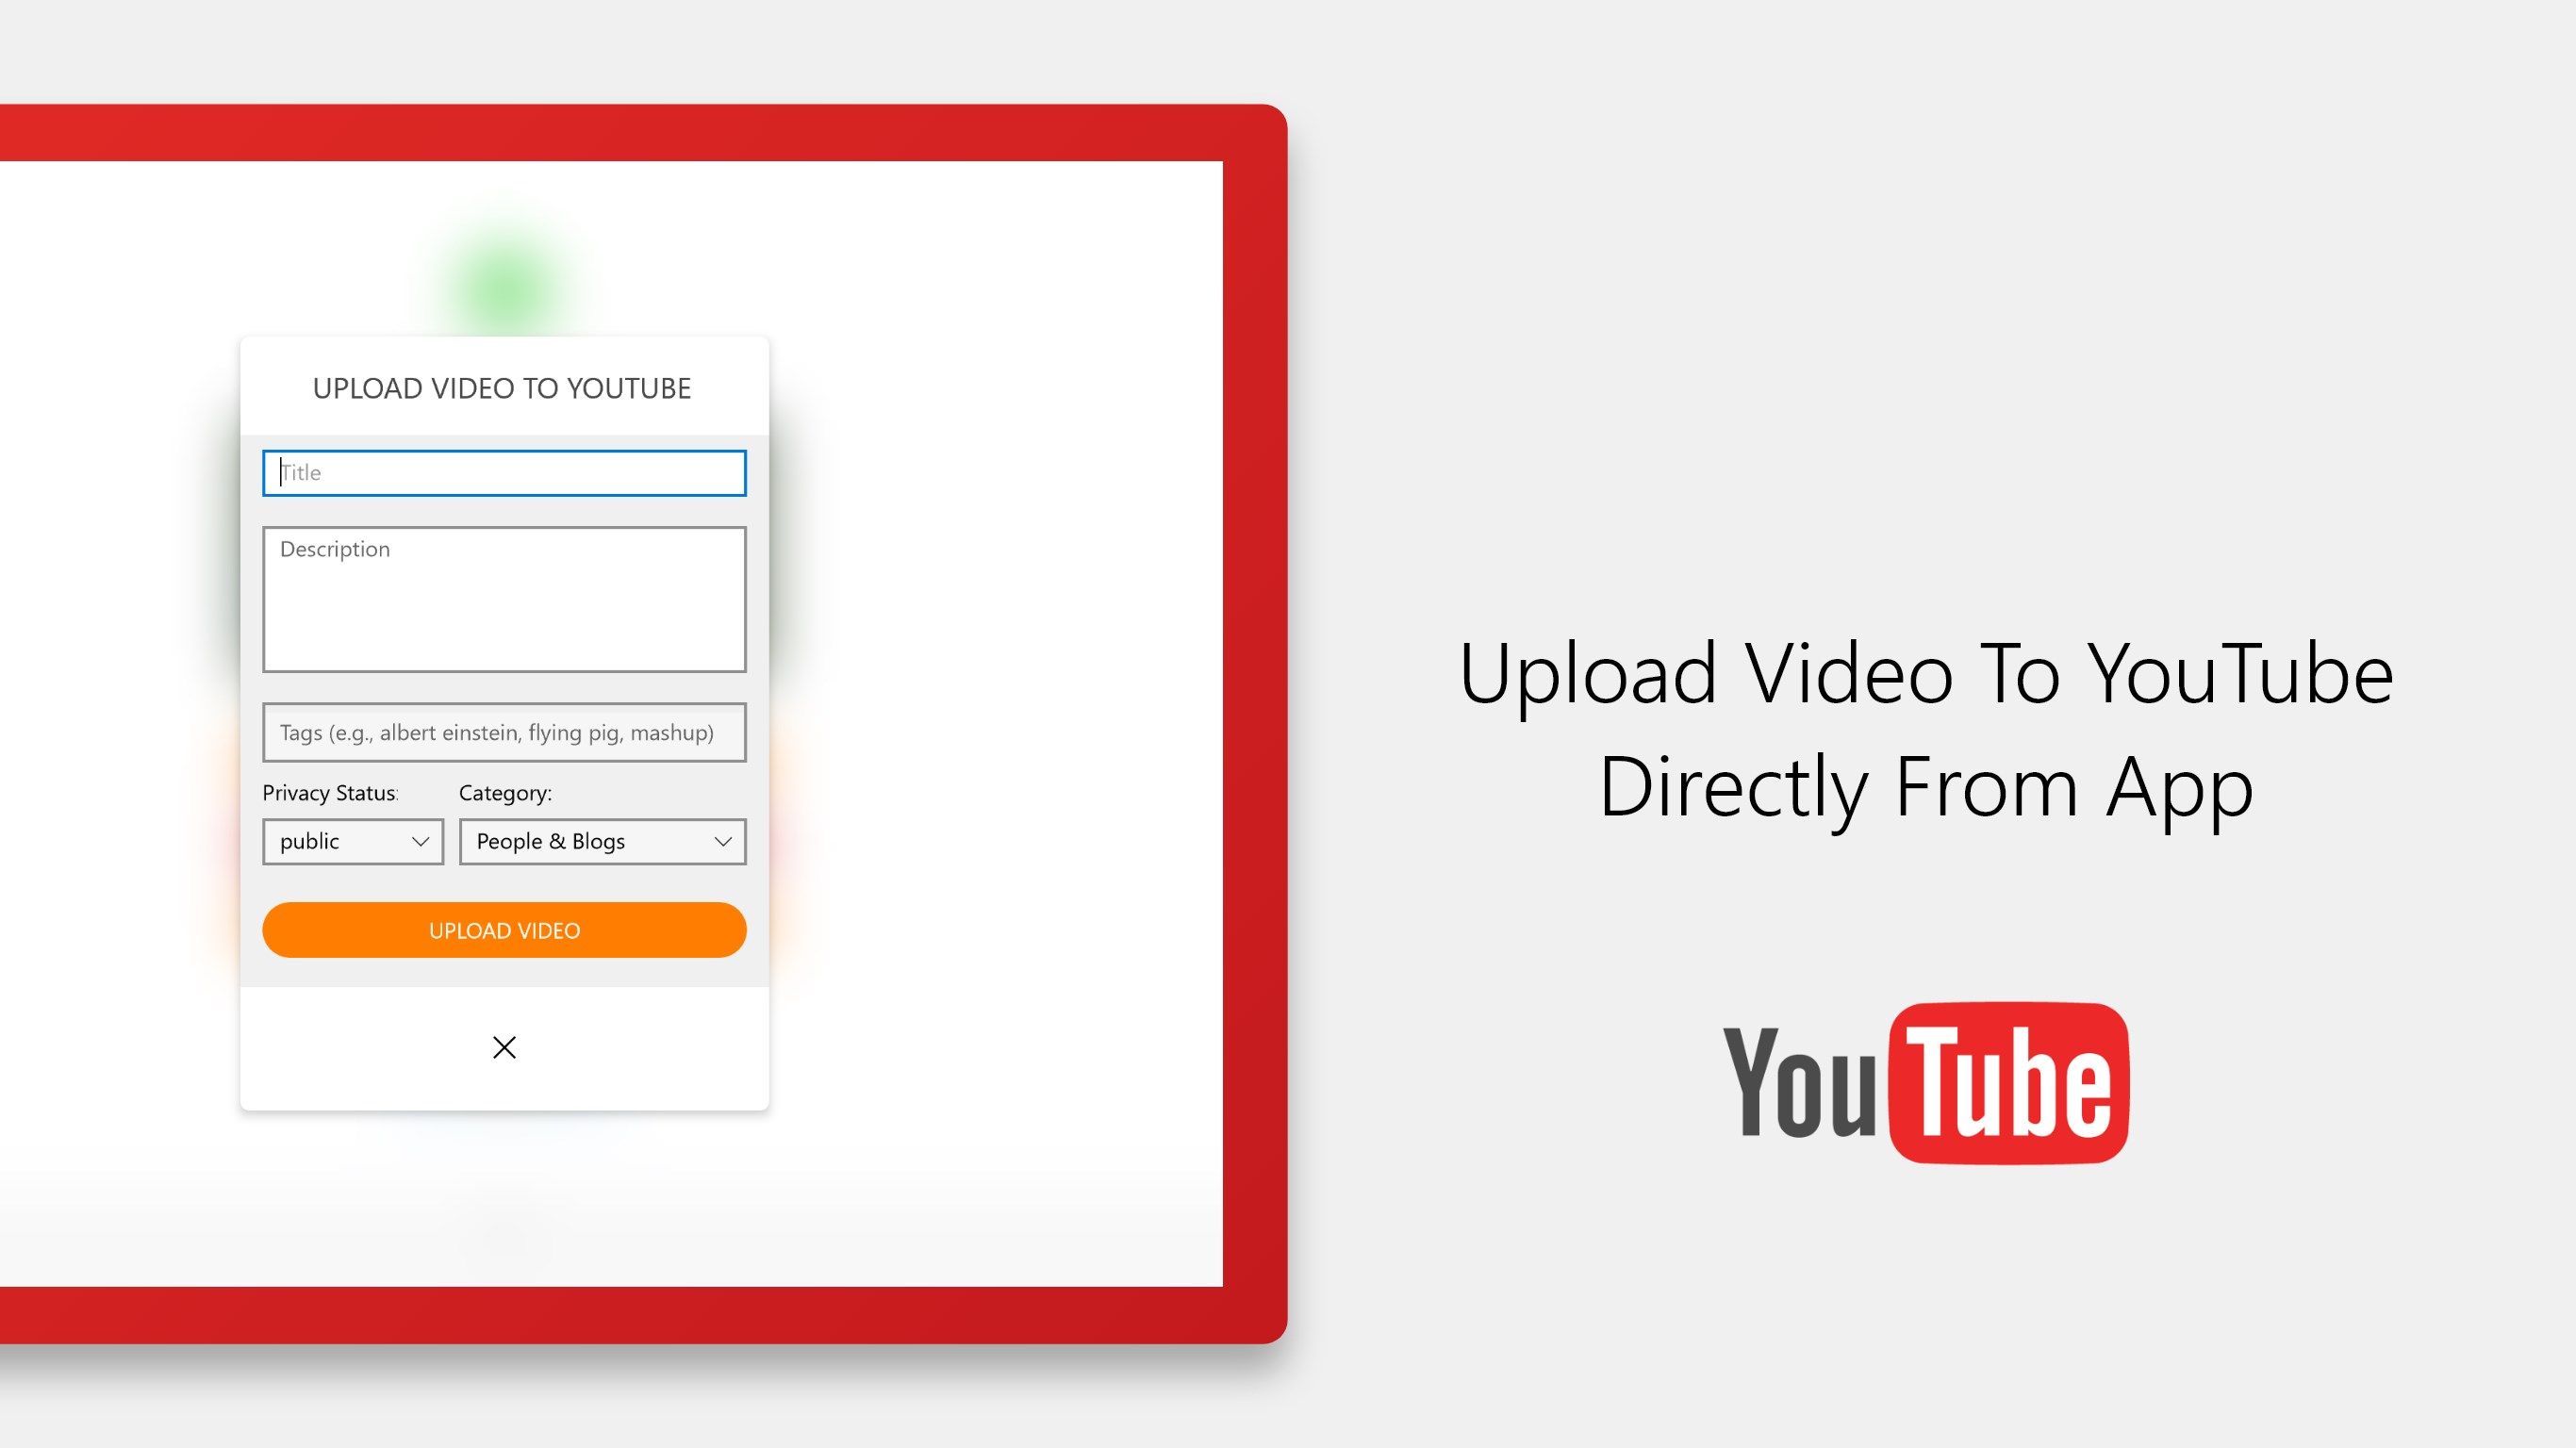 Upload Video To YouTube with help of Animotica